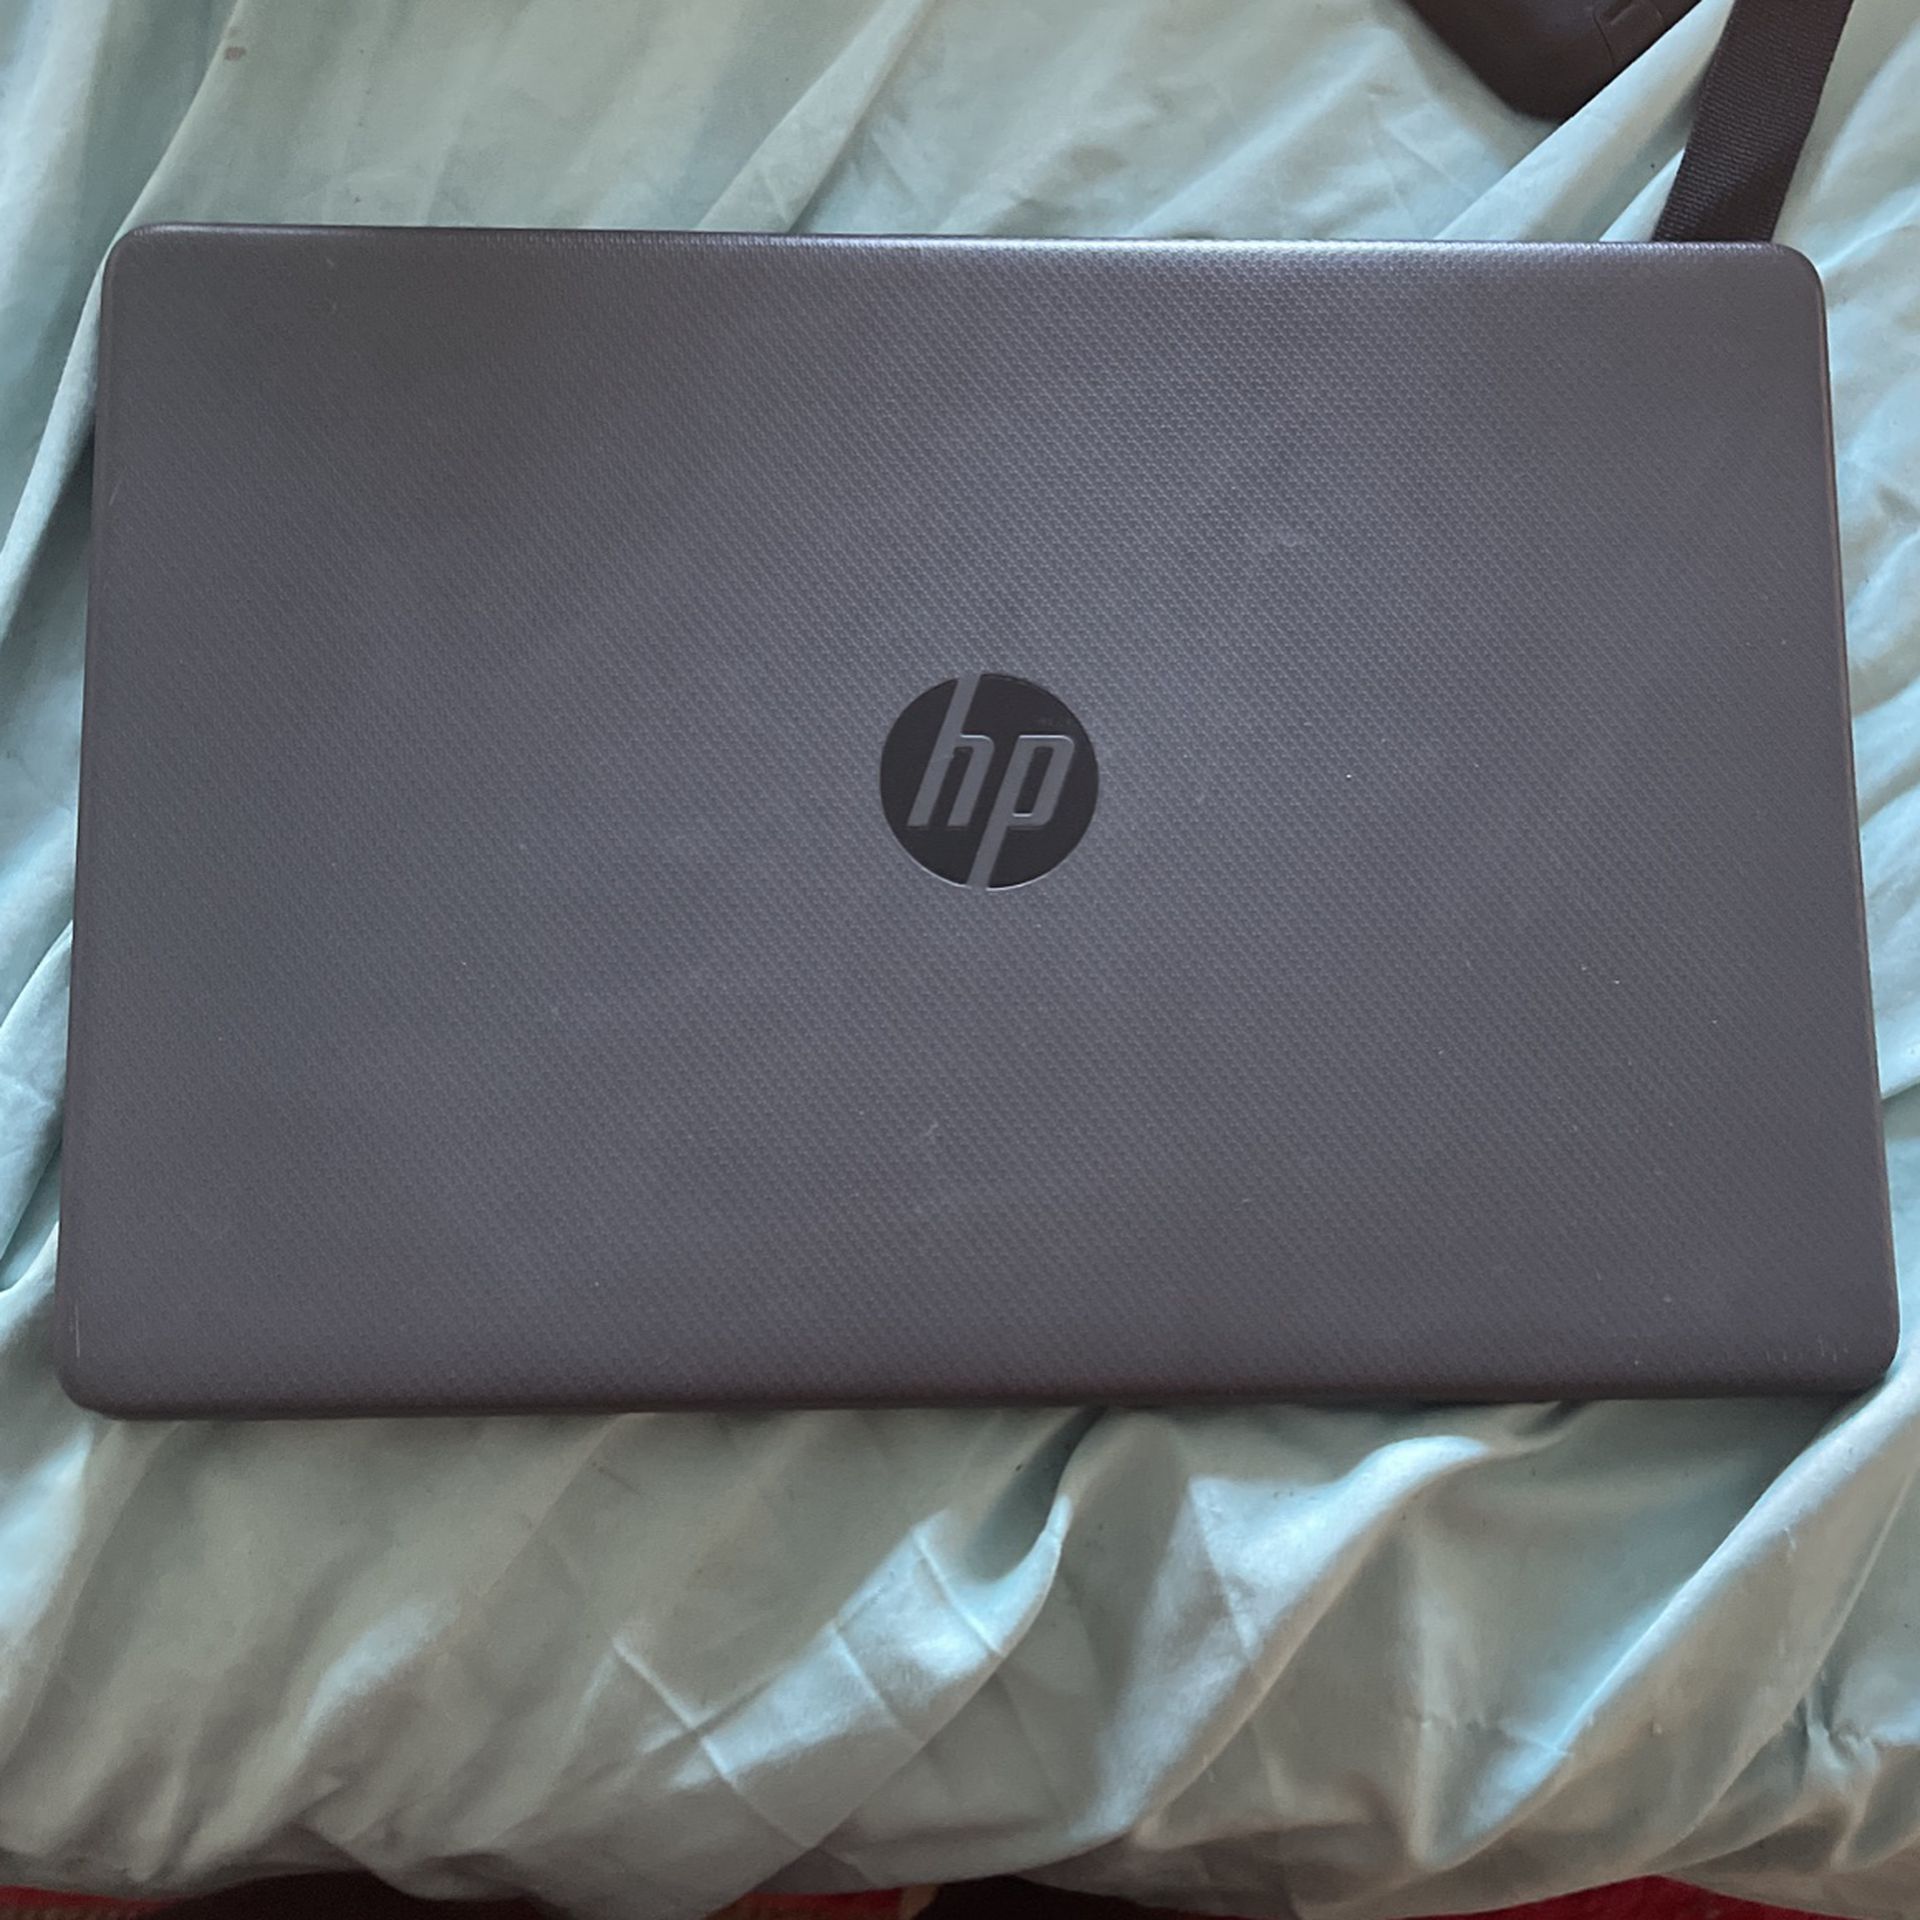 HP WINDOWS LAPTOP CHARGER INCLUDED